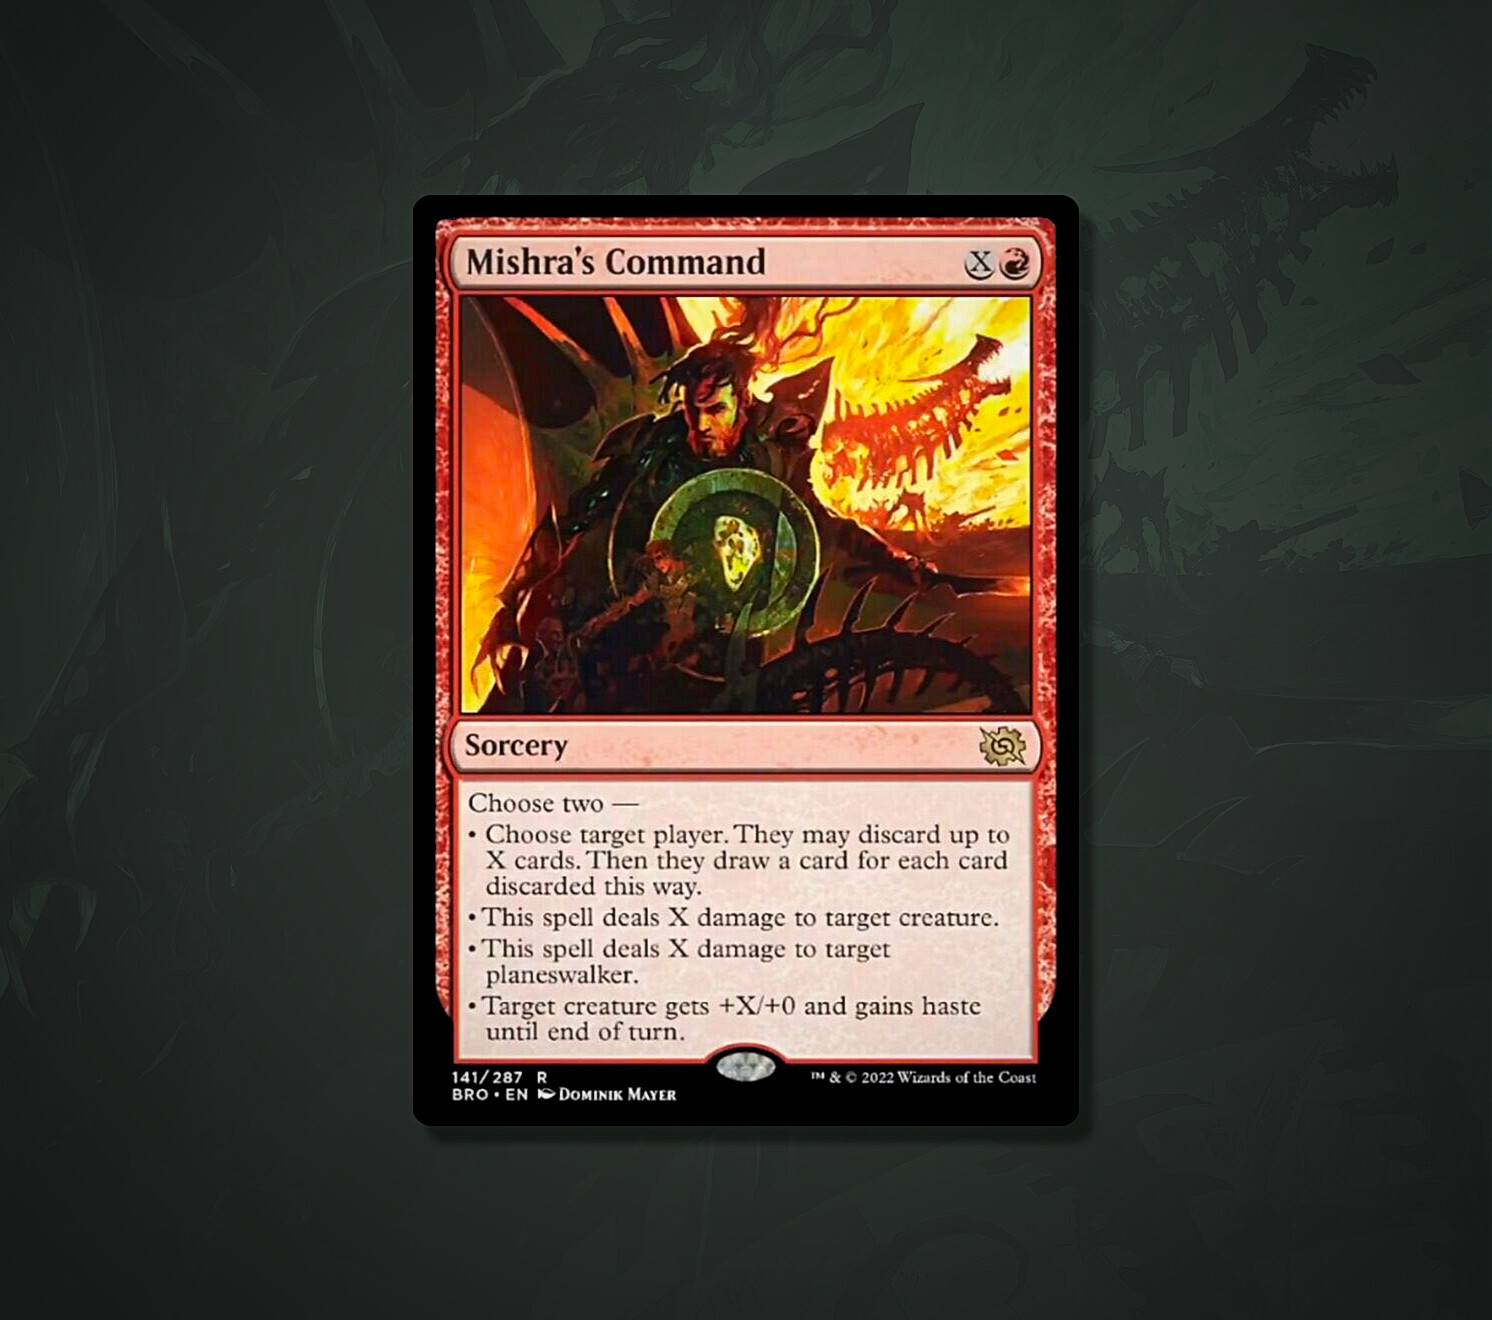 Card image for Mishra's Command.